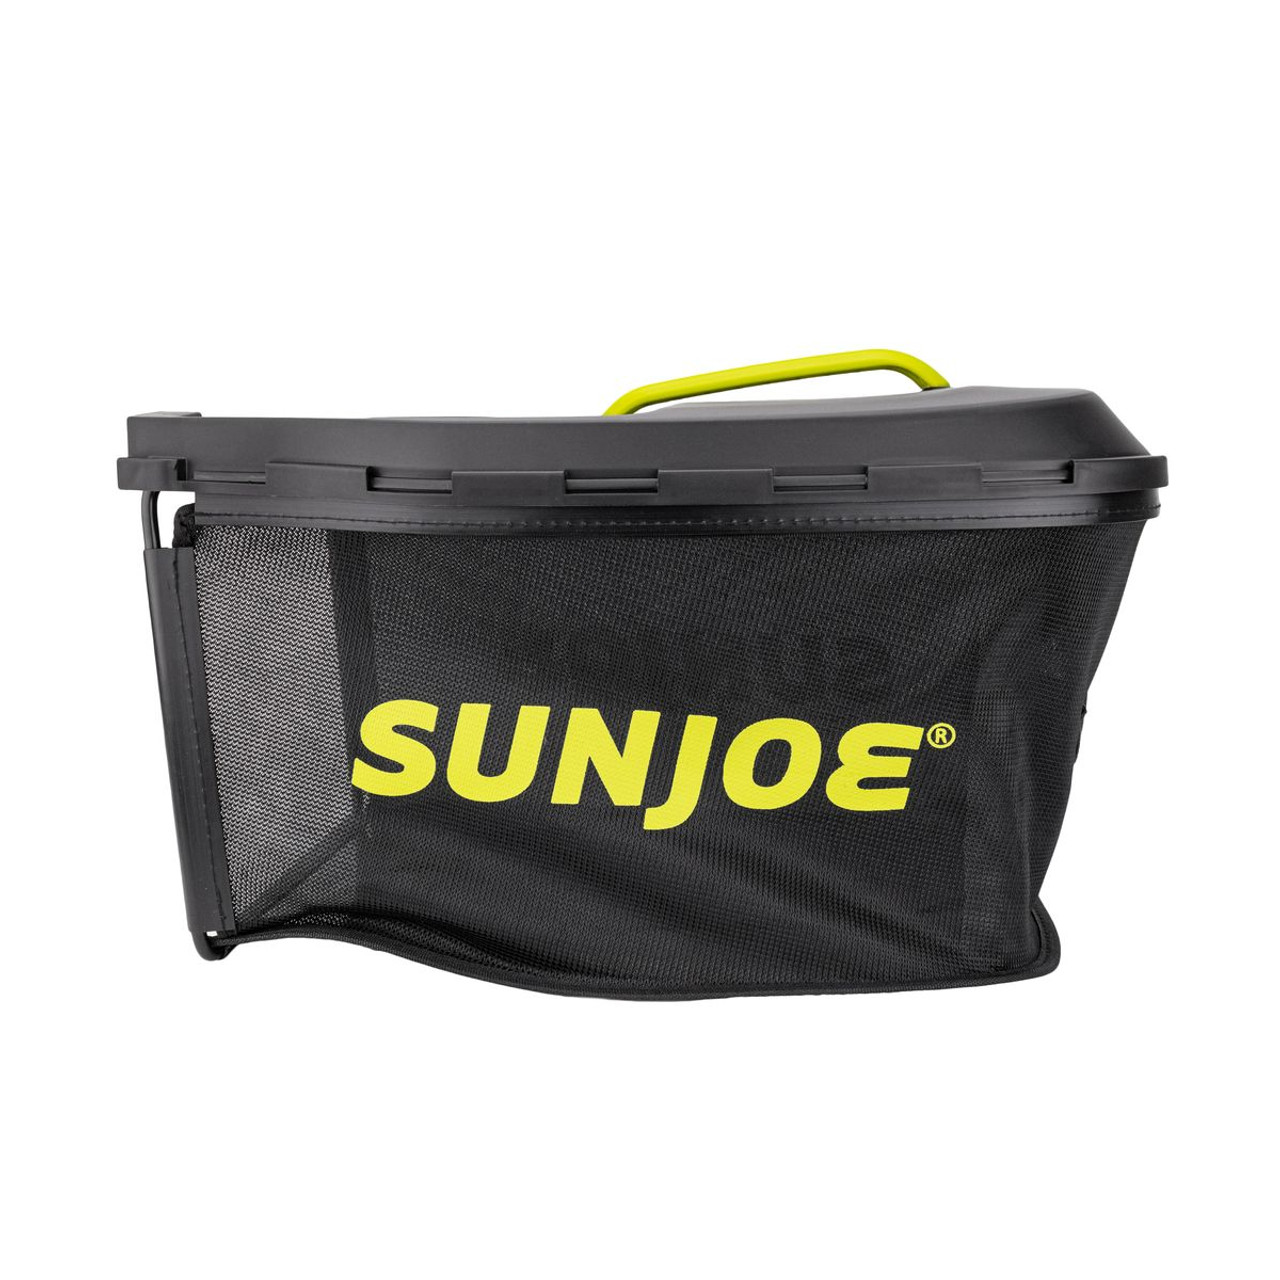 Sun Joe Replacement Collection Bag for Cordless Lawn Mower product image